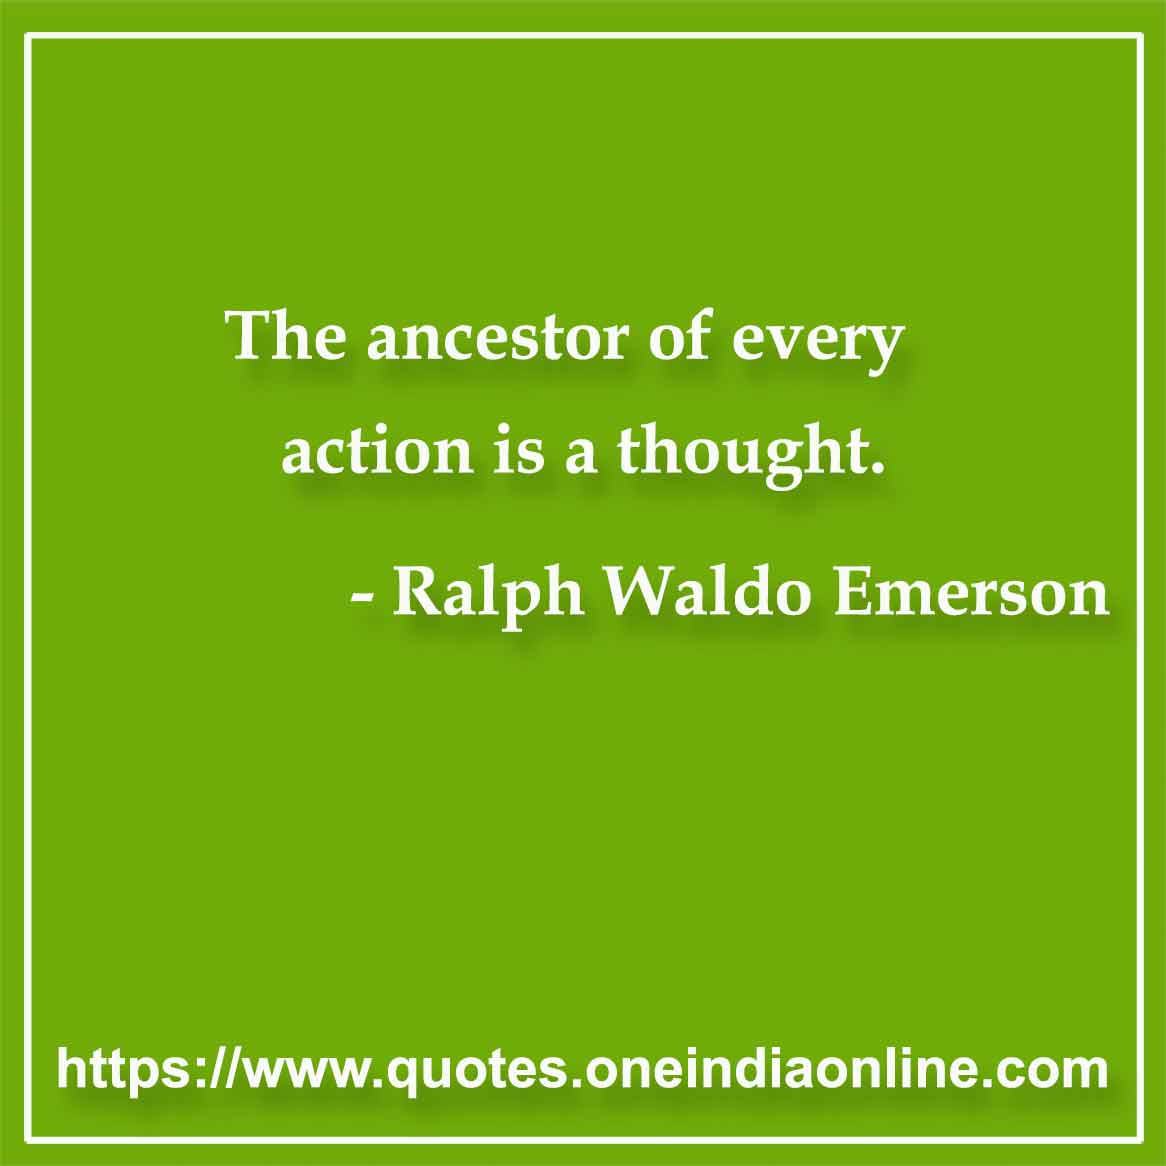 The ancestor of every action is a thought. 

- Ancestry Quote by Ralph Waldo Emerson